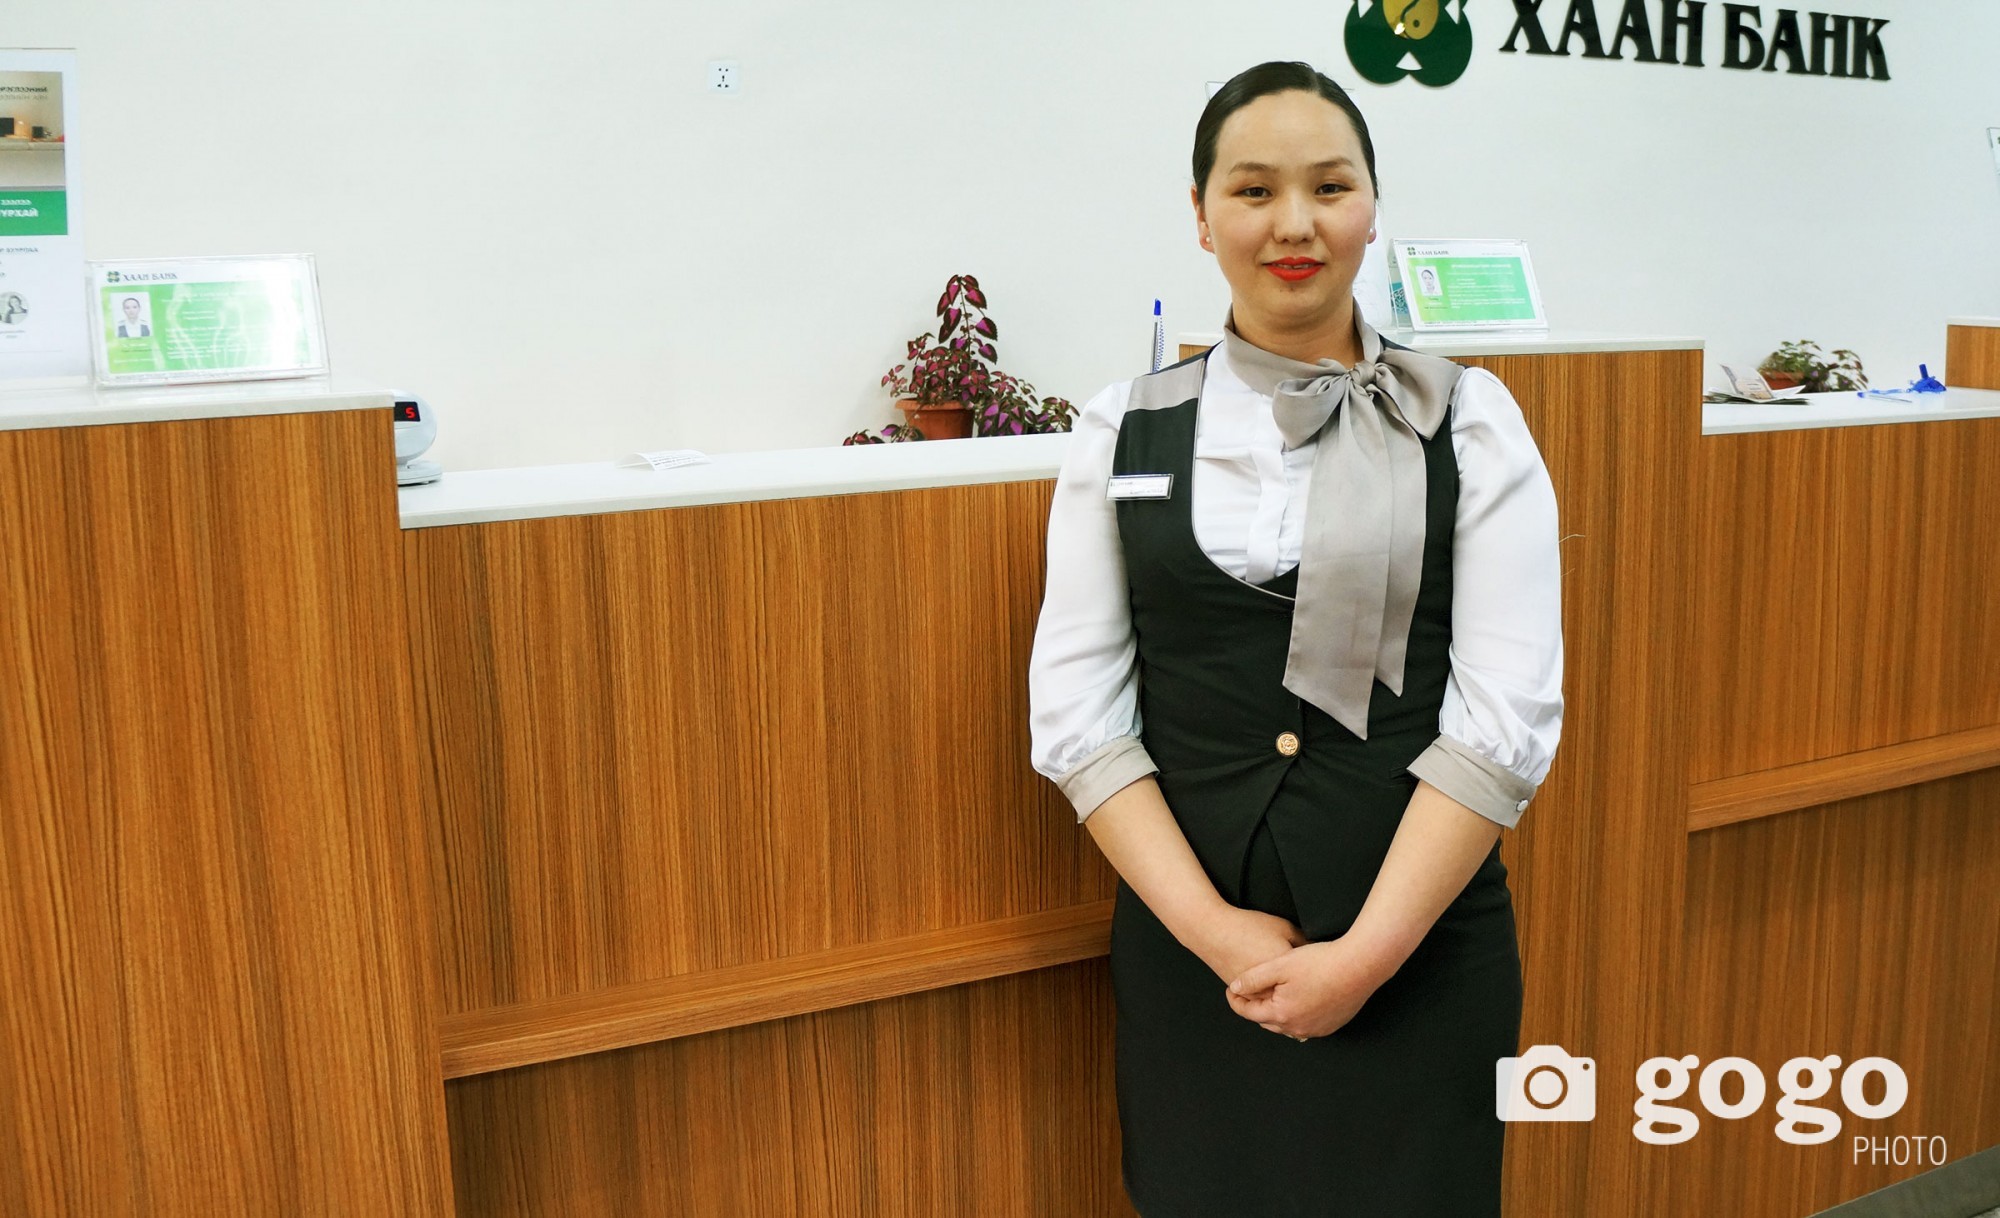 S.Baigalmaa works as teller at Khan bank. She wants people to be patient and become more respectful of each other.   